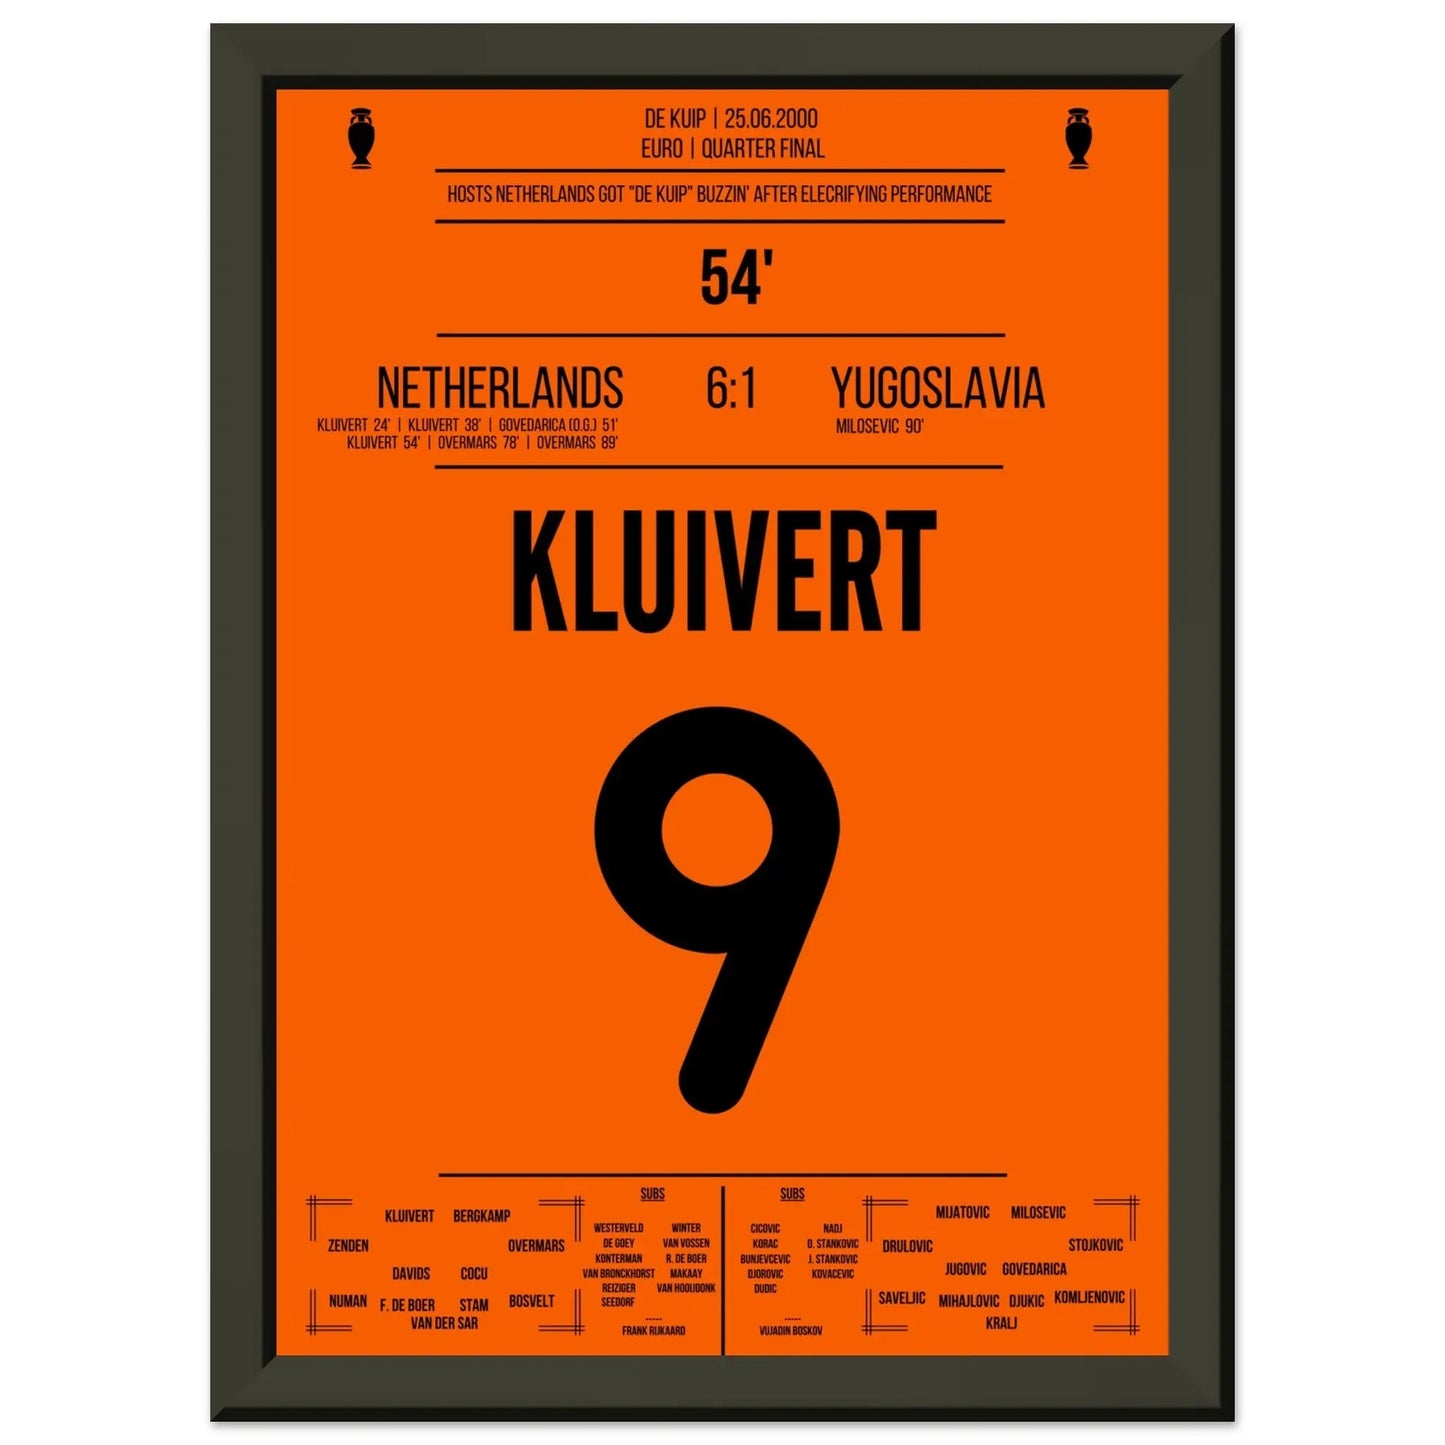 Kluivert's hat-trick in the Euro 2000 quarter-finals